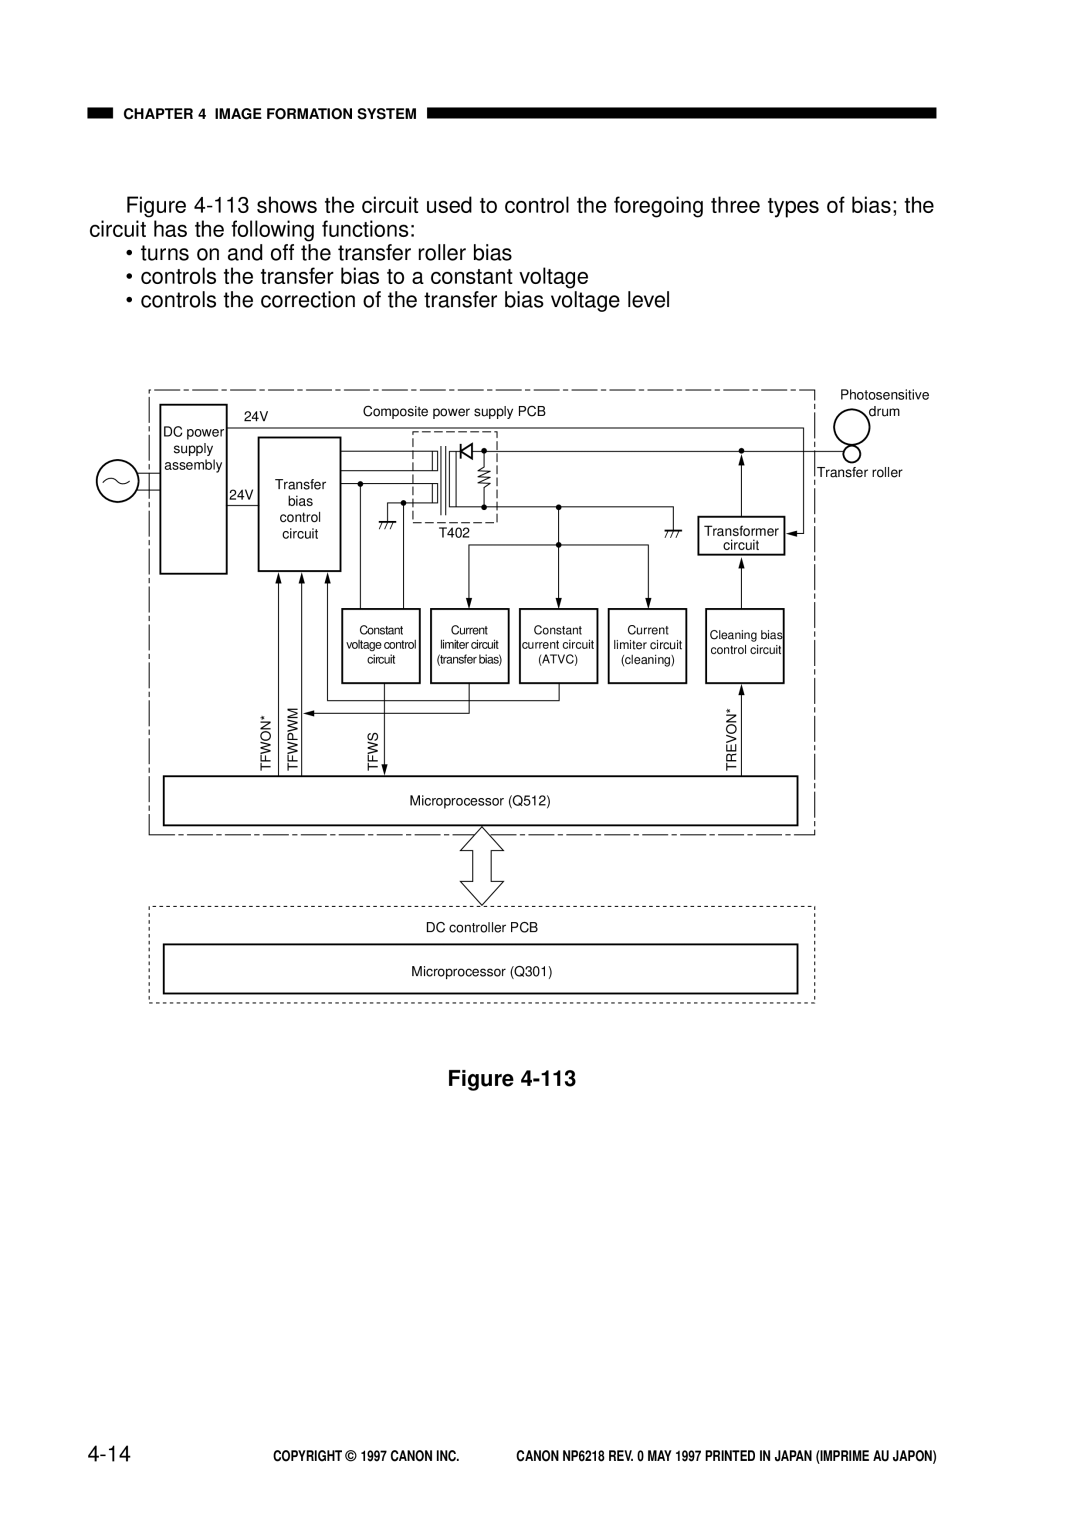 Canon NP6218, FY8-13EX-000 service manual 4-14, turns on and off the transfer roller bias 